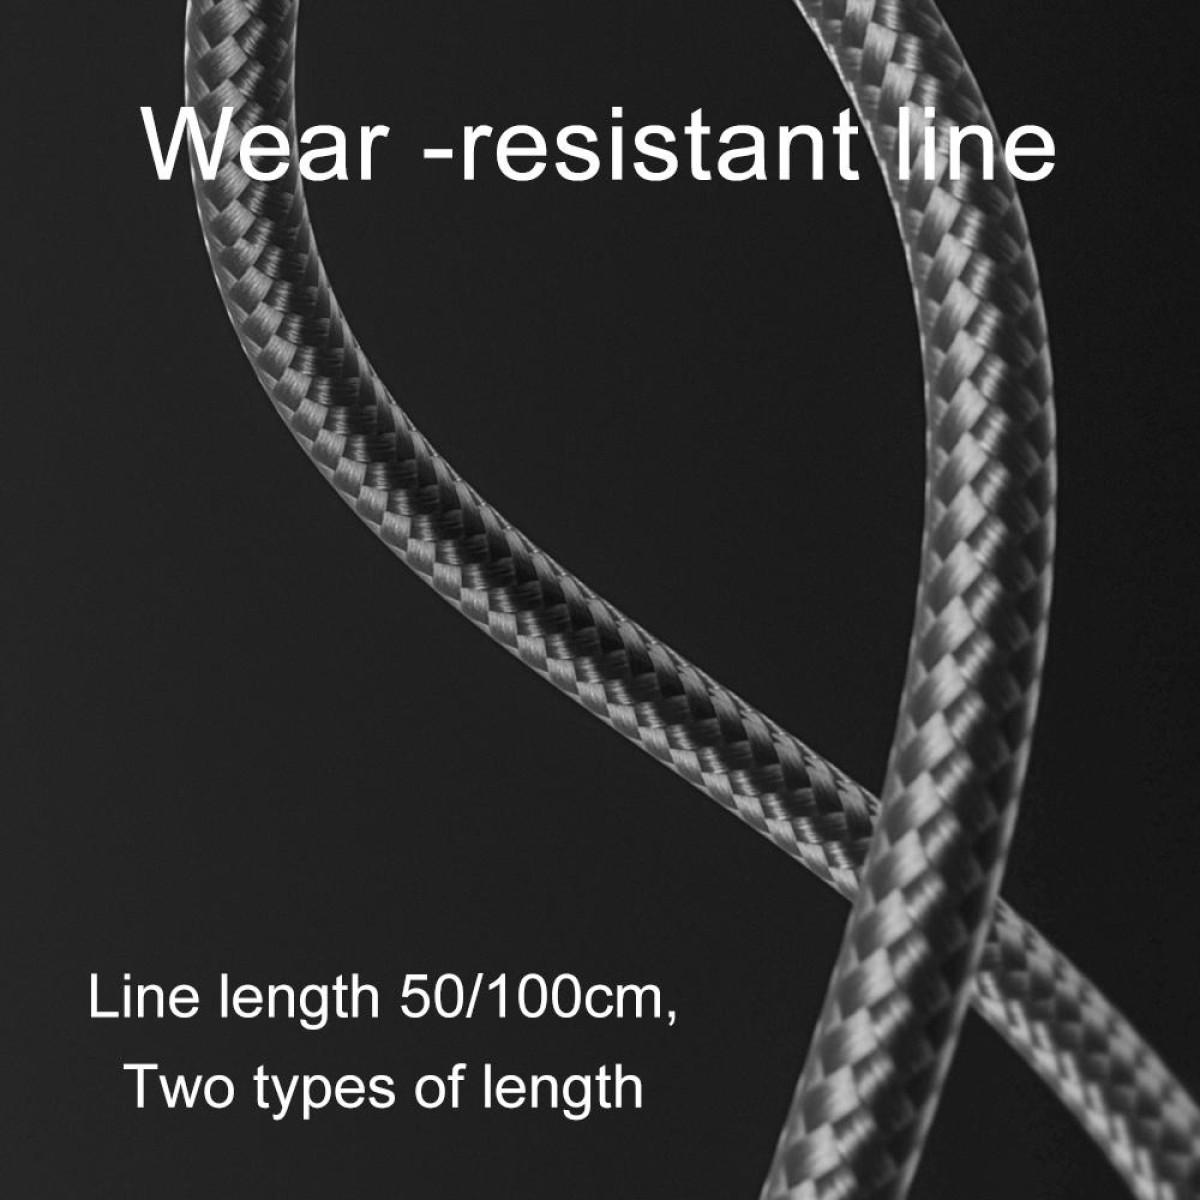 USB-C / Type-C to XT60 Data Cable, Length: 50cm